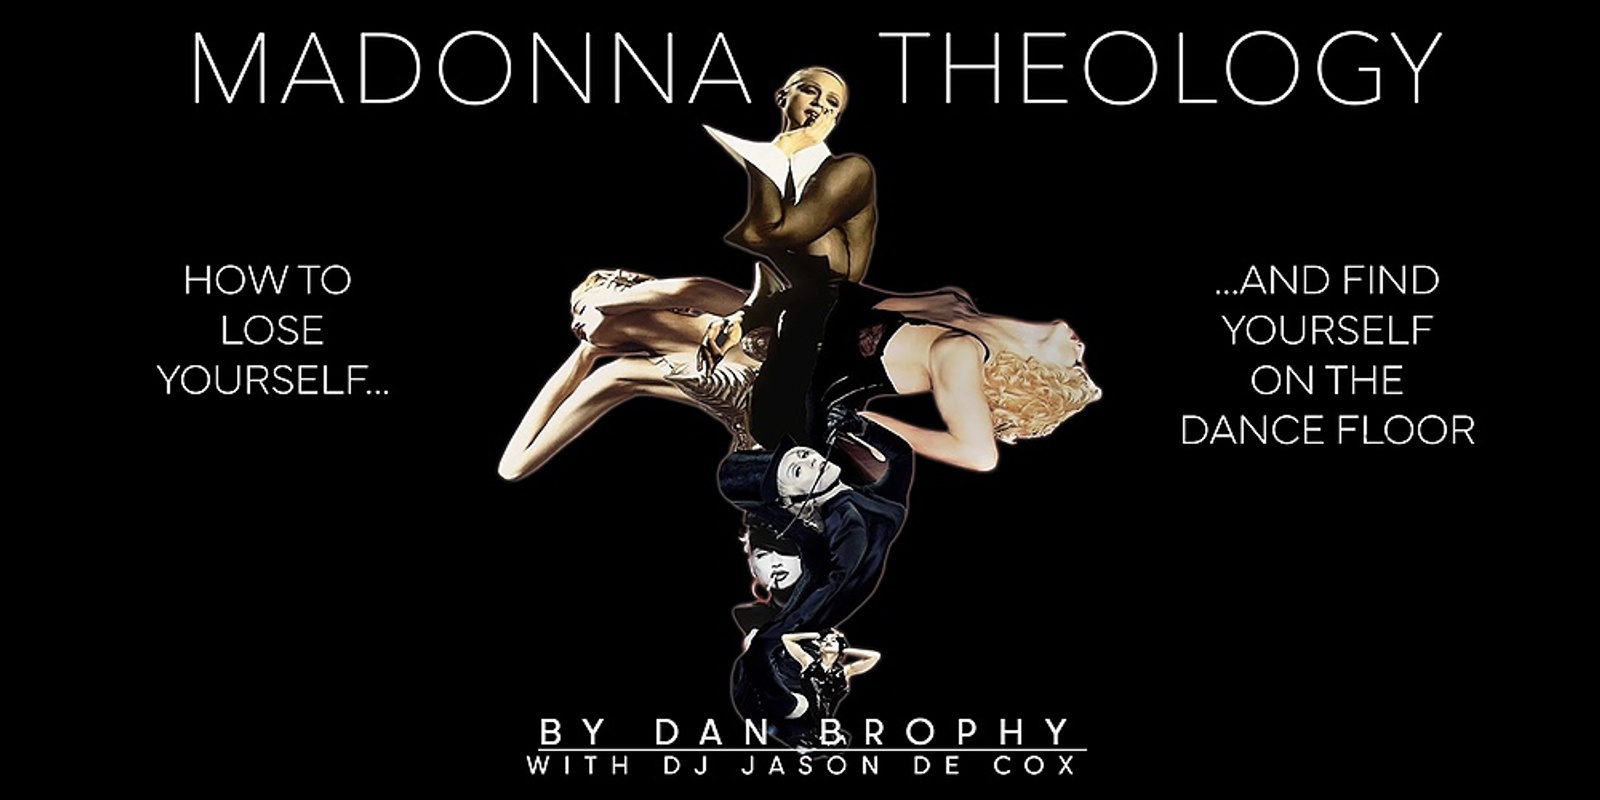 Madonna Theology presented by Dan Brophy